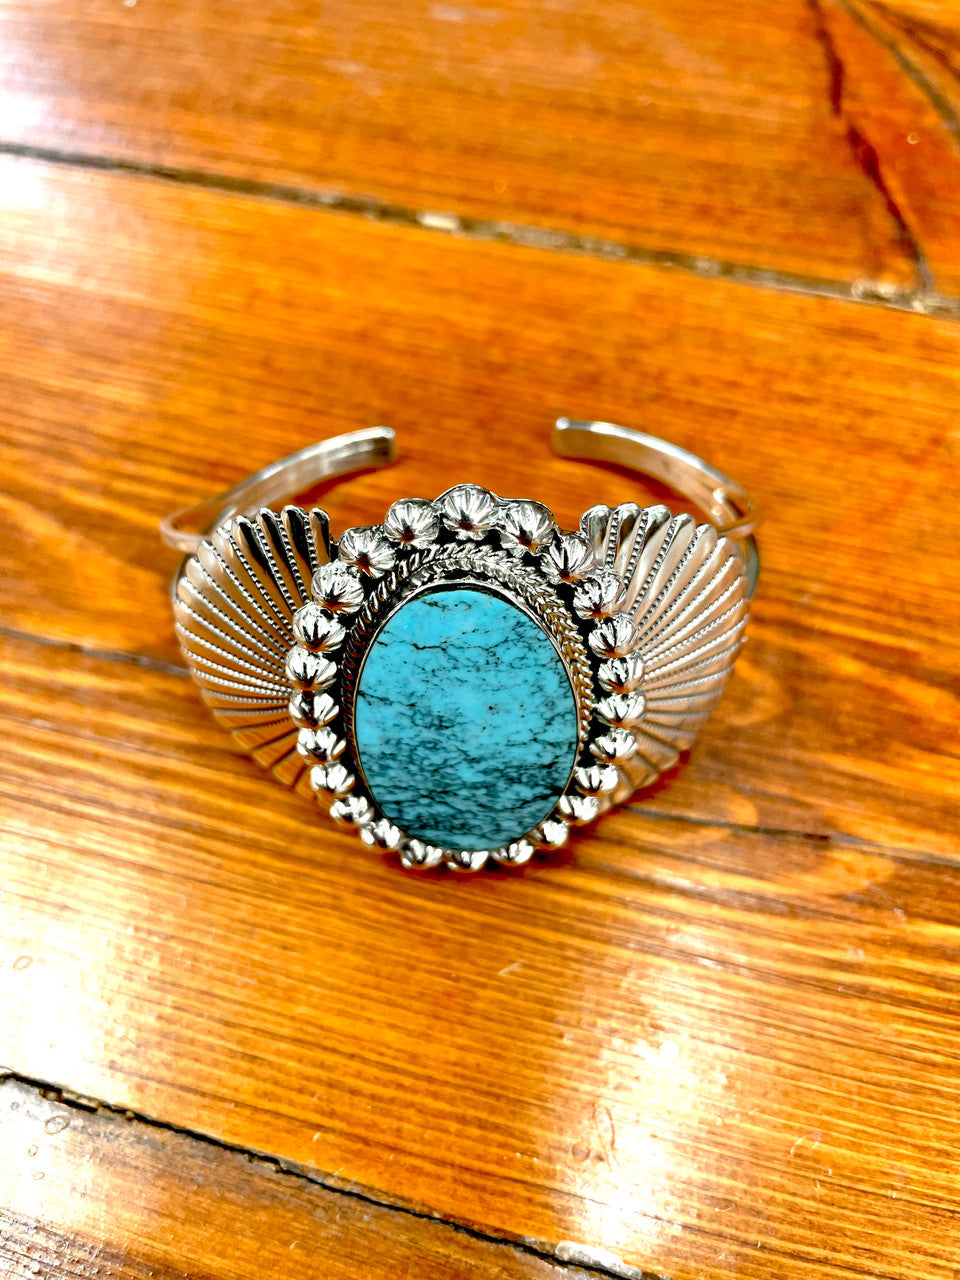 Good Morning Oval Turquoise Cuff